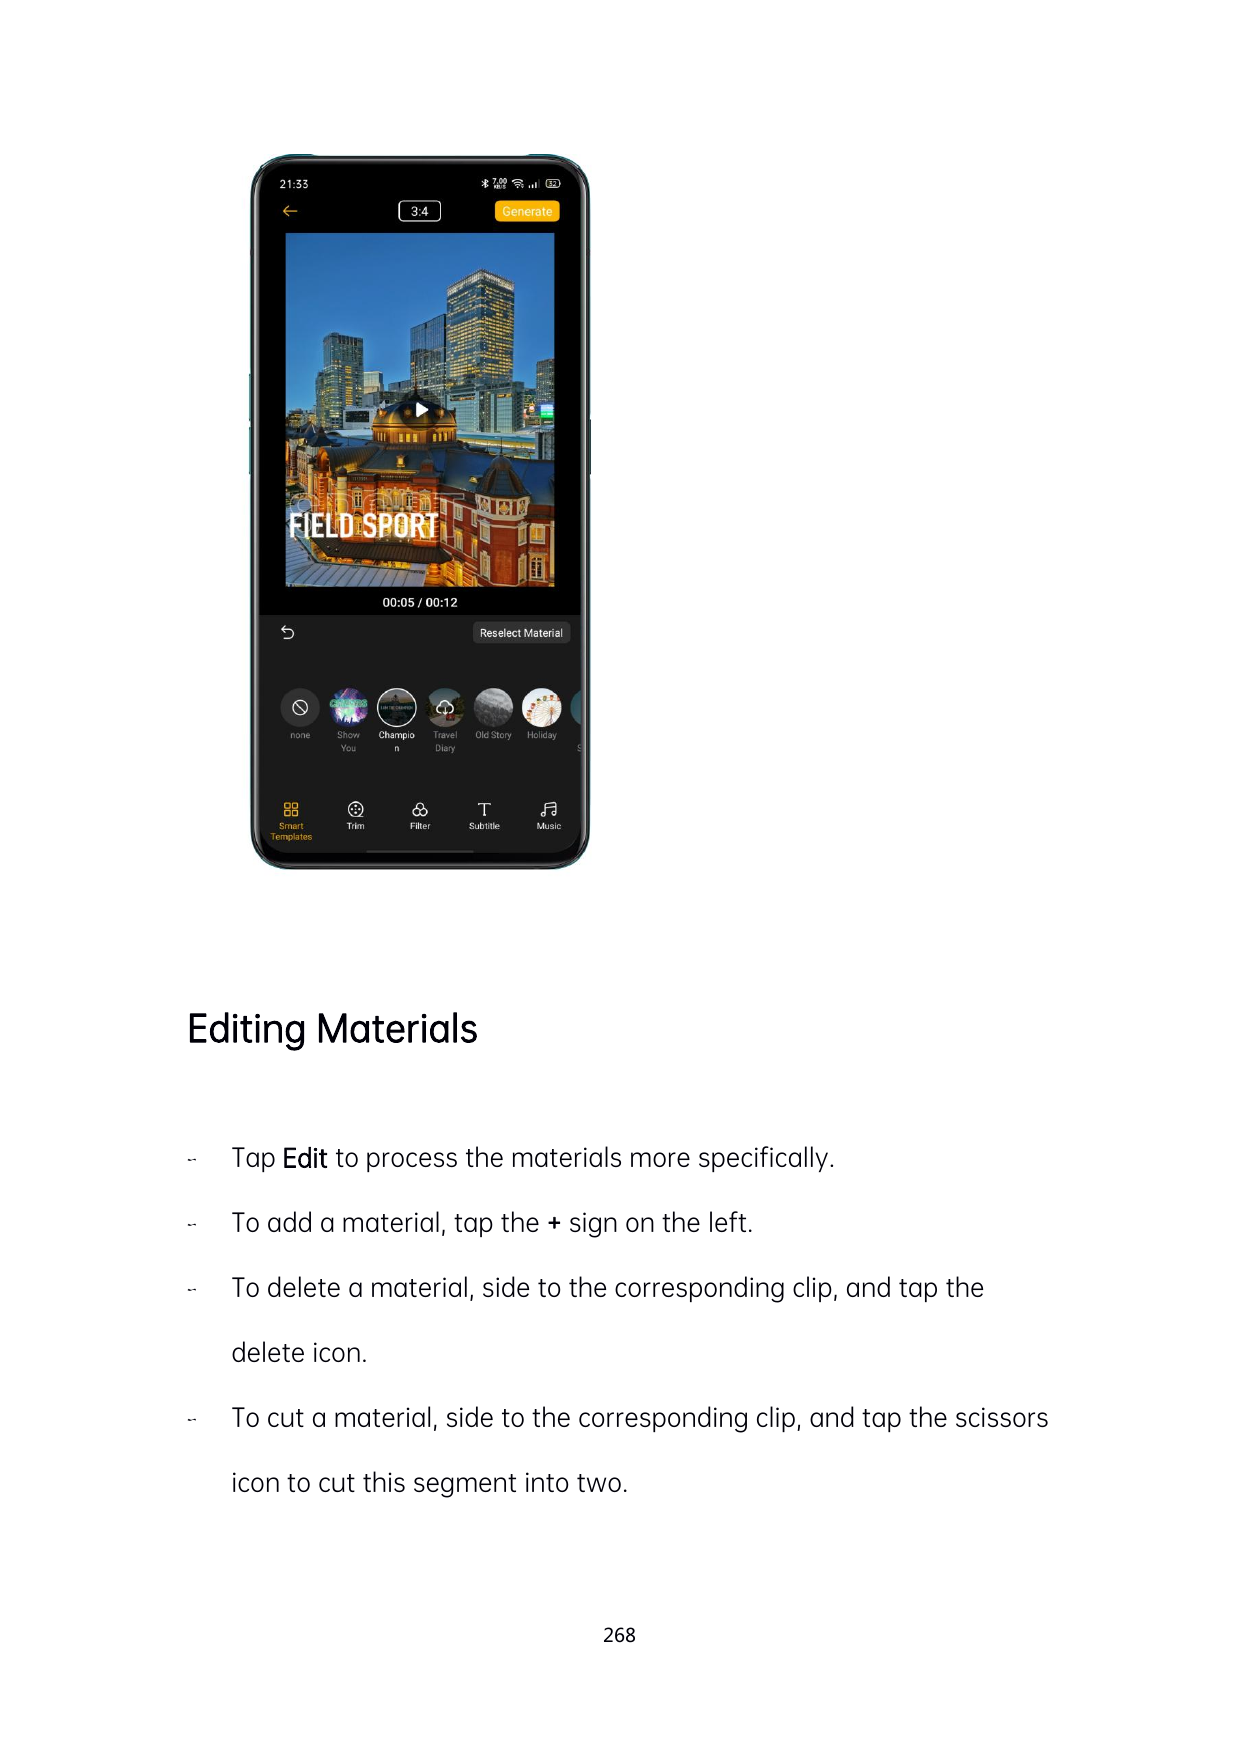 Editing MaterialsTap Edit to process the materials more specifically.To add a material, tap the + sign on the left.To delete 